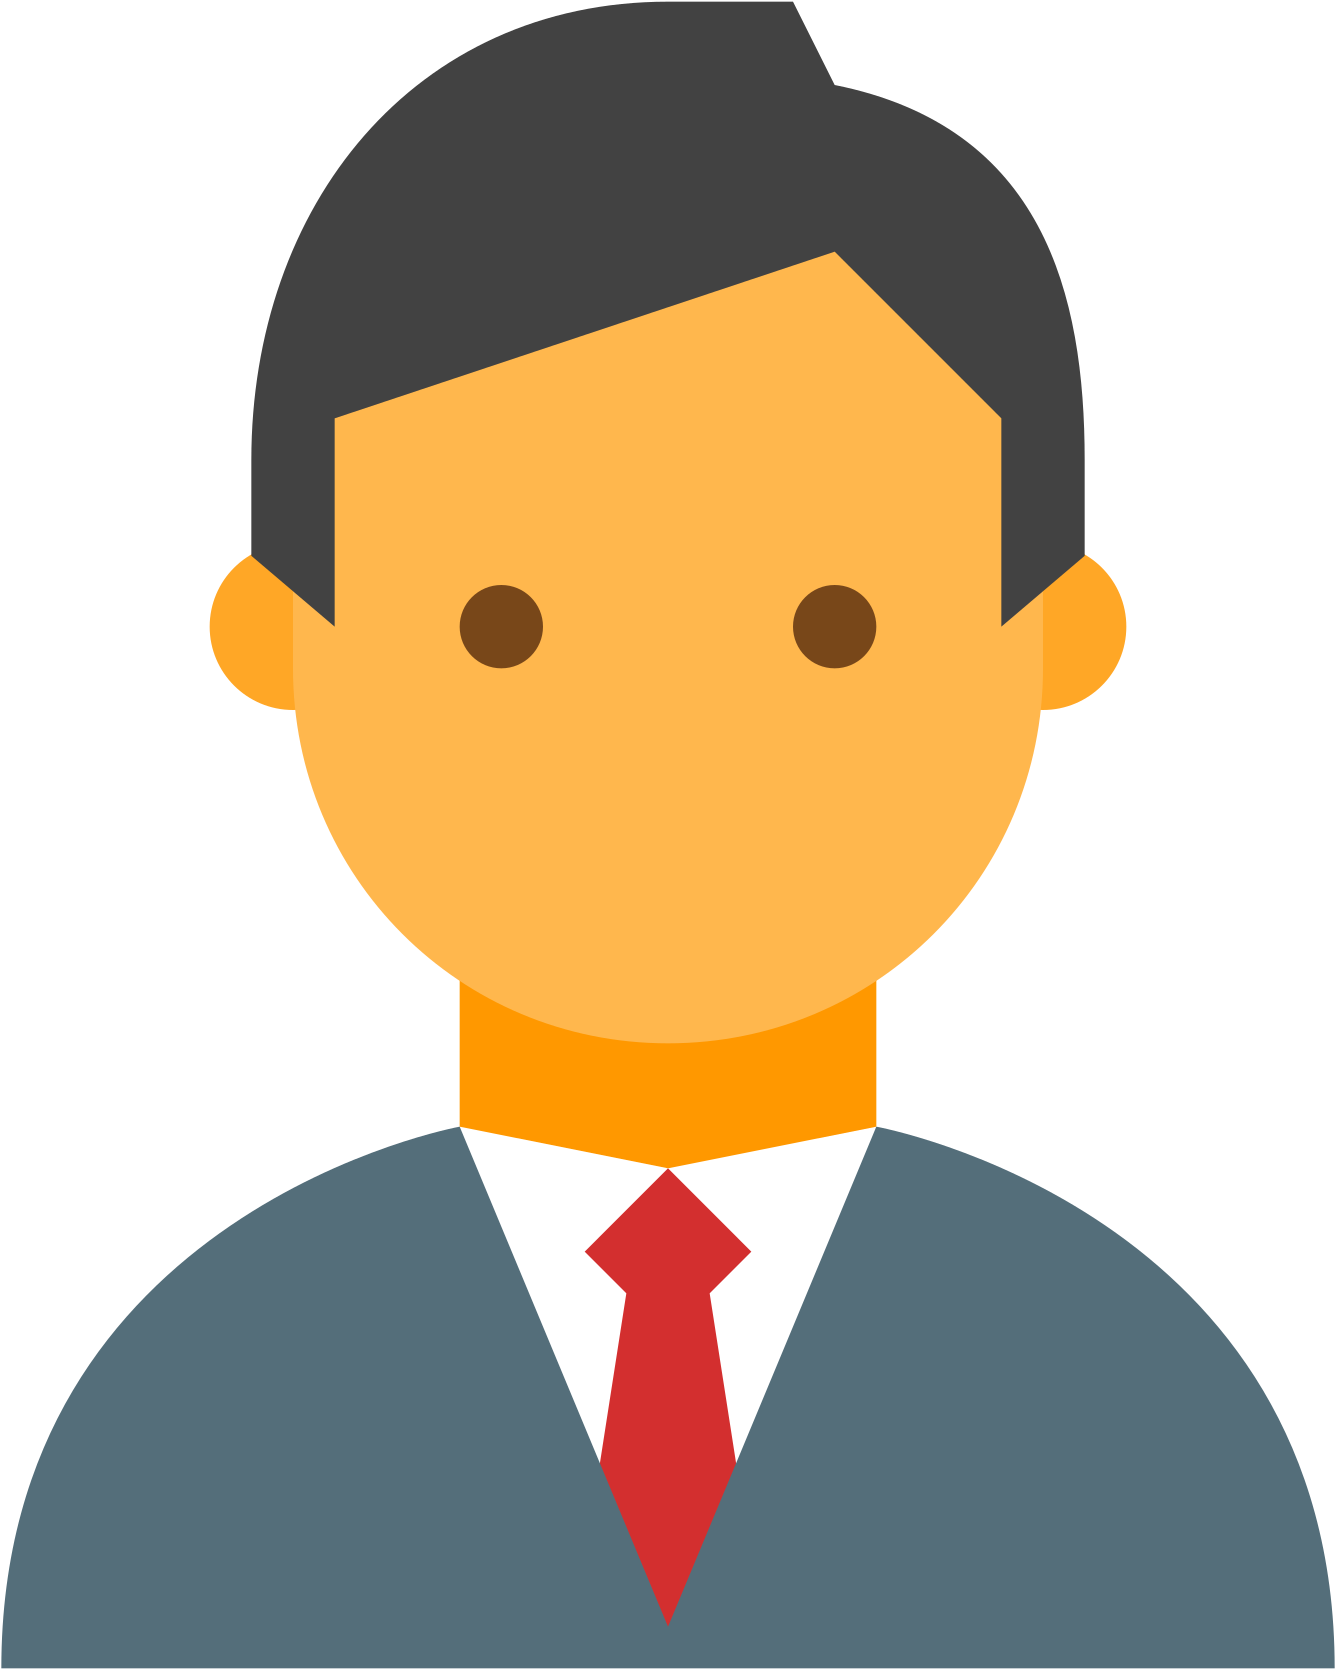 Icons8 Flat Businessman - Person Icon Png (2000x2000)